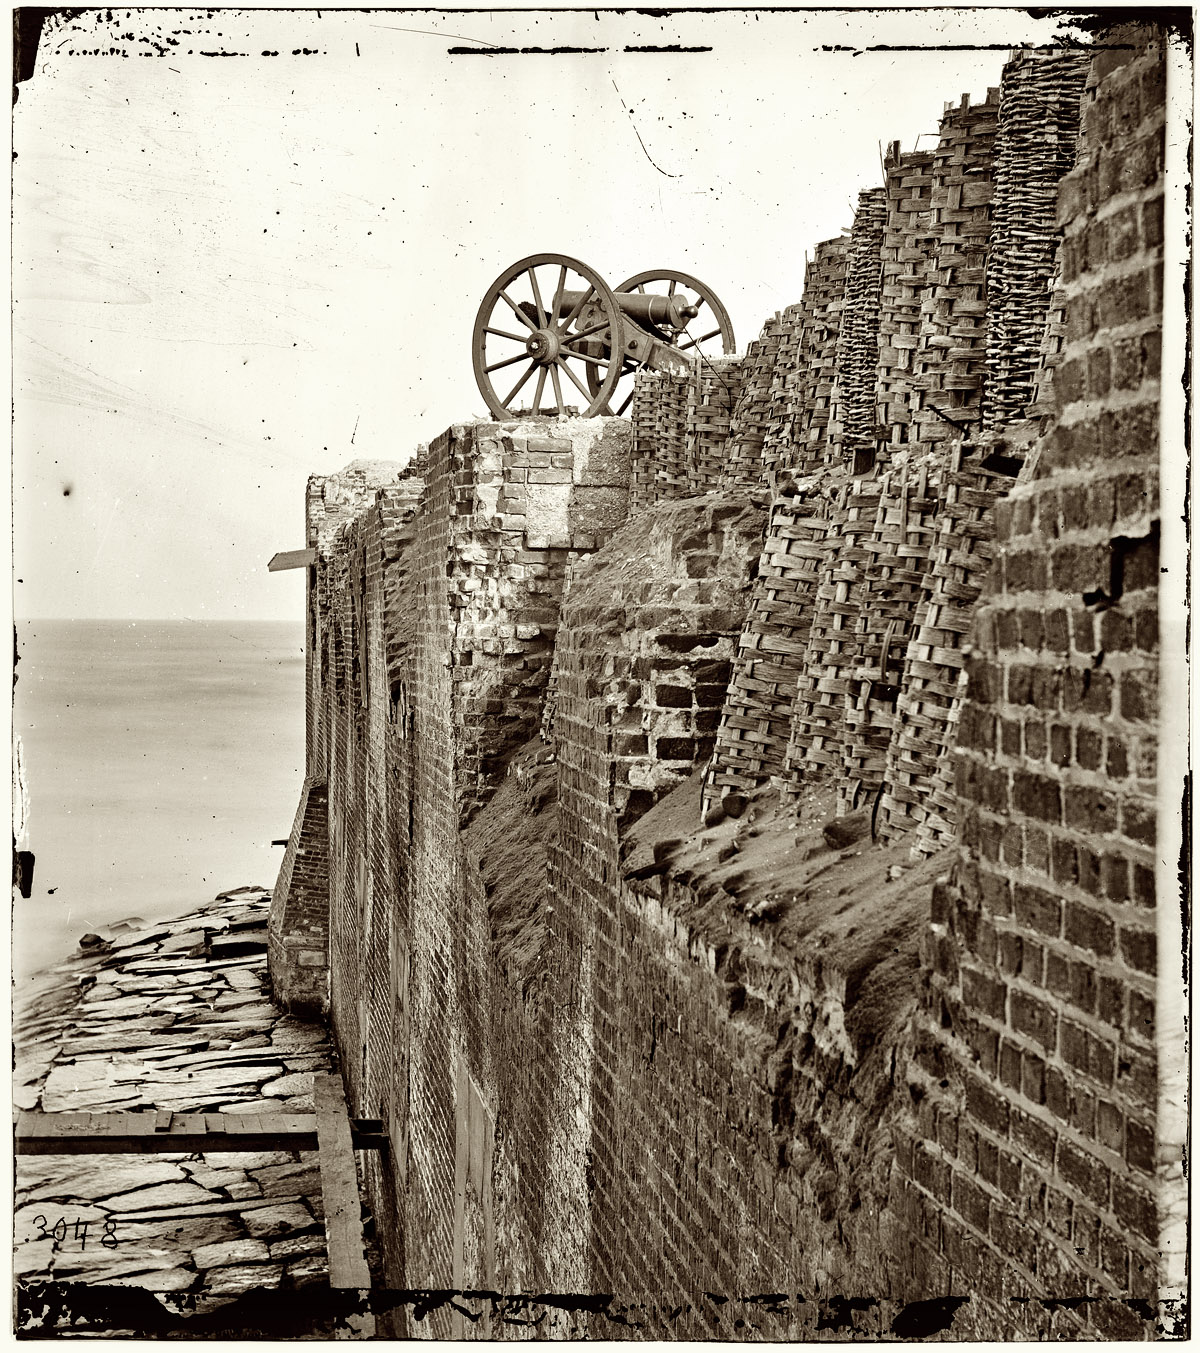 1865. "Charleston, South Carolina. Breach patched with gabions on the north wall of Fort Sumter." From photographs of the Federal Navy, and seaborne expeditions against the Atlantic Coast of the Confederacy, 1863-1865. Wet collodion glass plate negative, right half of stereograph pair, from Civil War photographs compiled by Hirst Milhollen and Donald Mugridge. View full size.